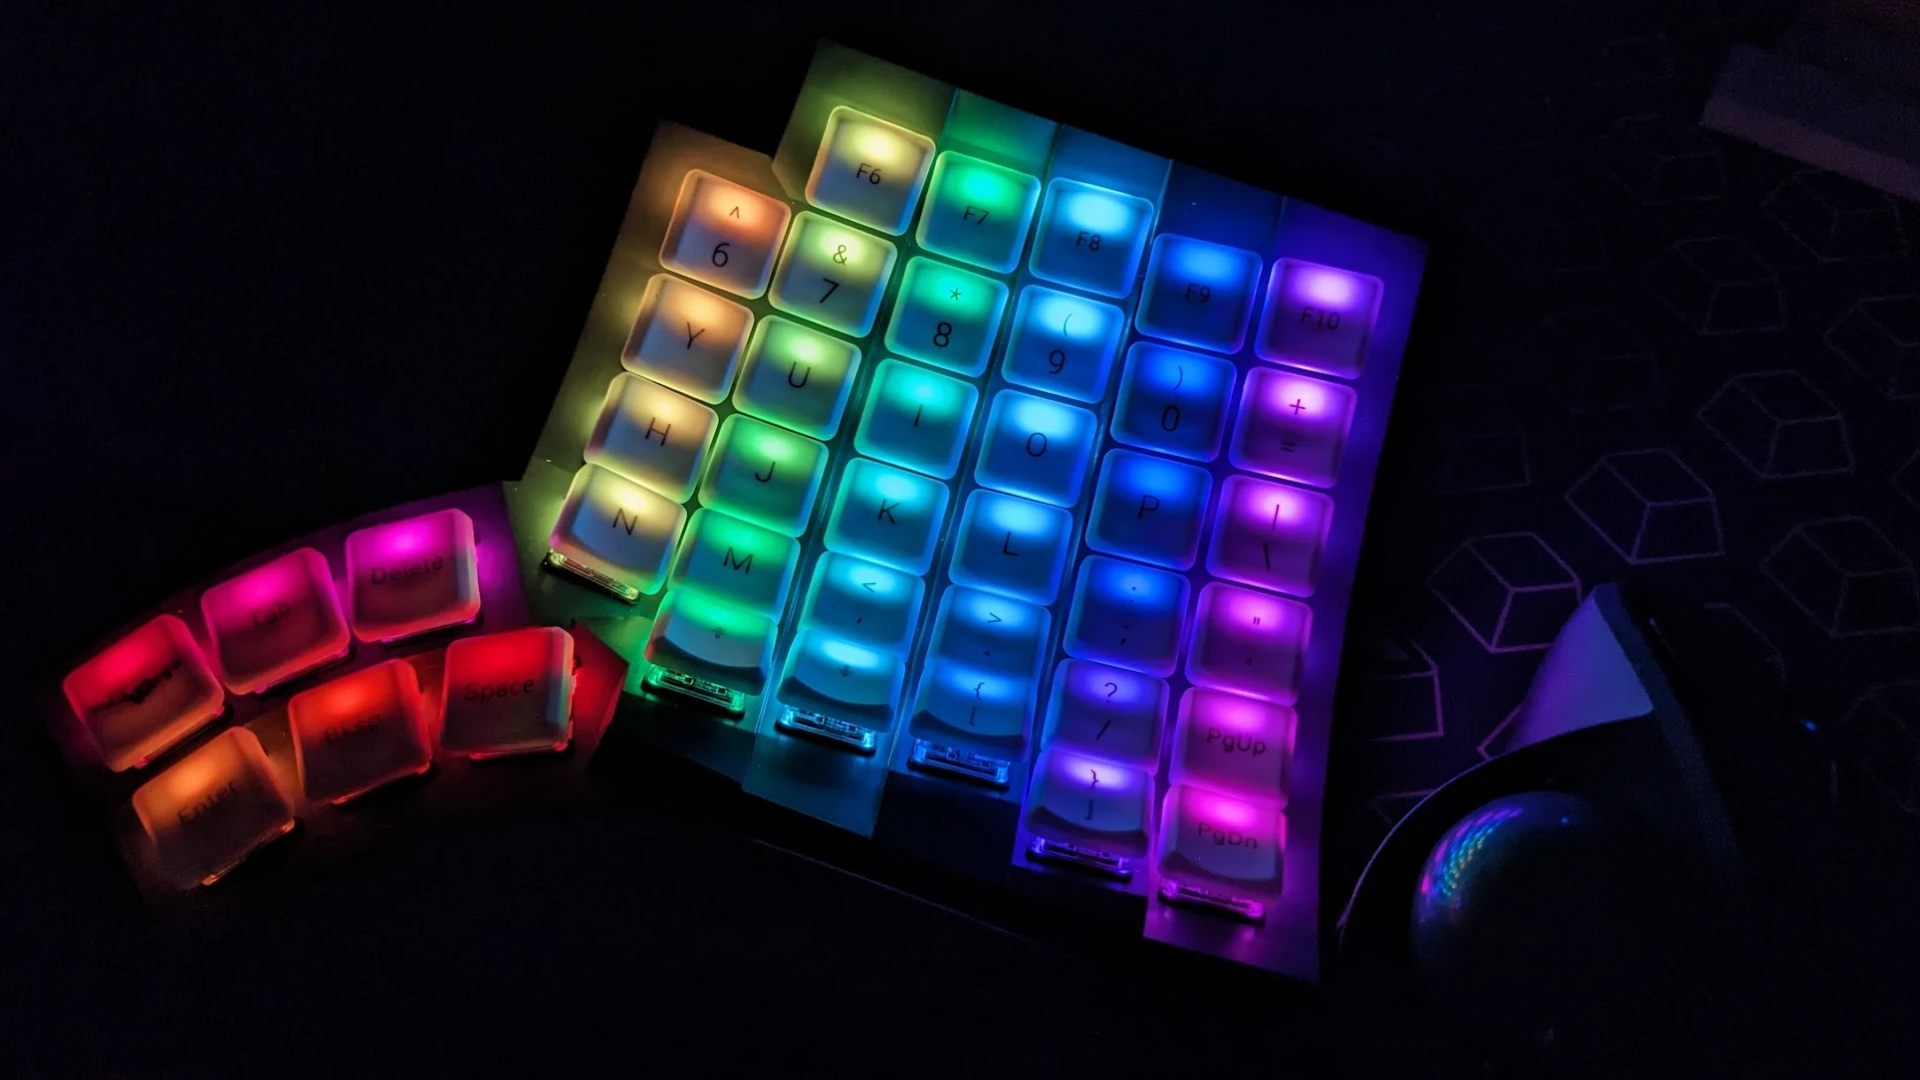 The right half of the Glove80 in the dark, keys illuminated in rainbow colors